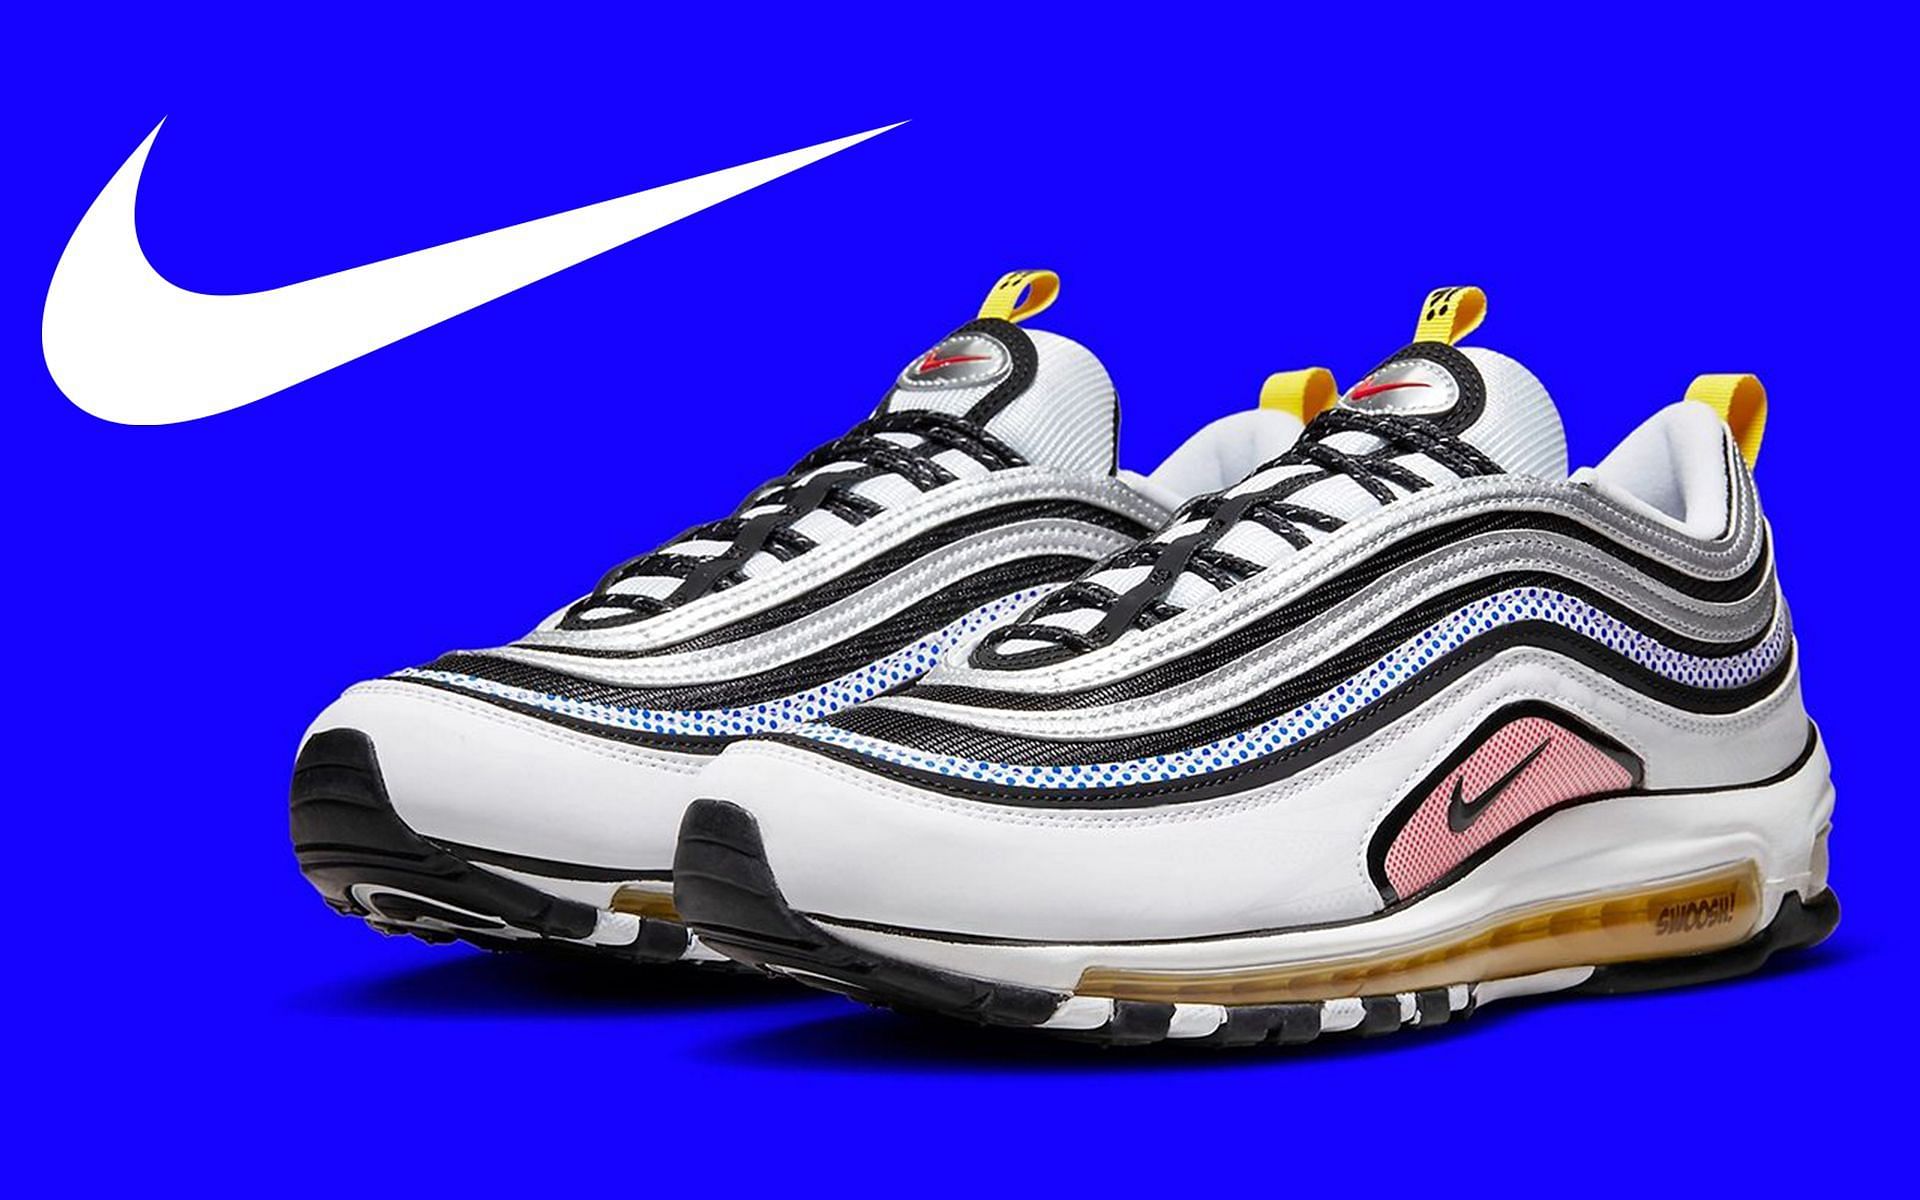 Nike Air Max 97 The Mighty Swooshers colorway (Image via Nike)